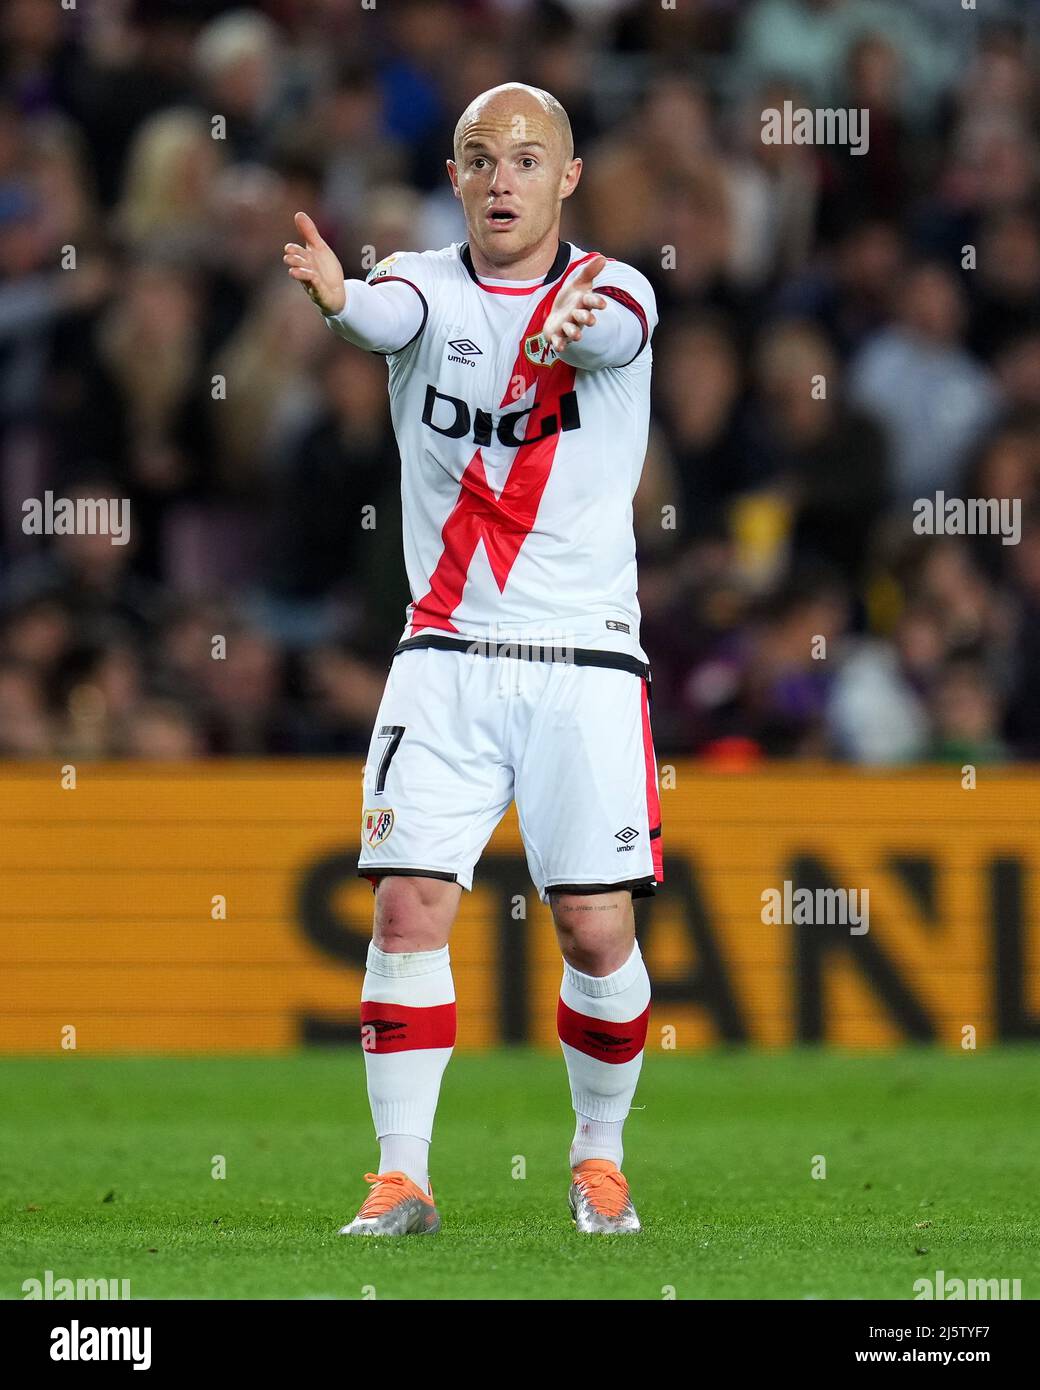 Isi Palazon of Rayo Vallecano during the La Liga match between FC Barcelona and Rayo Vallecano played at Camp Nou Stadium on April 24, 2022 in Barcelona, Spain. (Photo by Sergio Ruiz / PRESSINPHOTO) Stock Photo